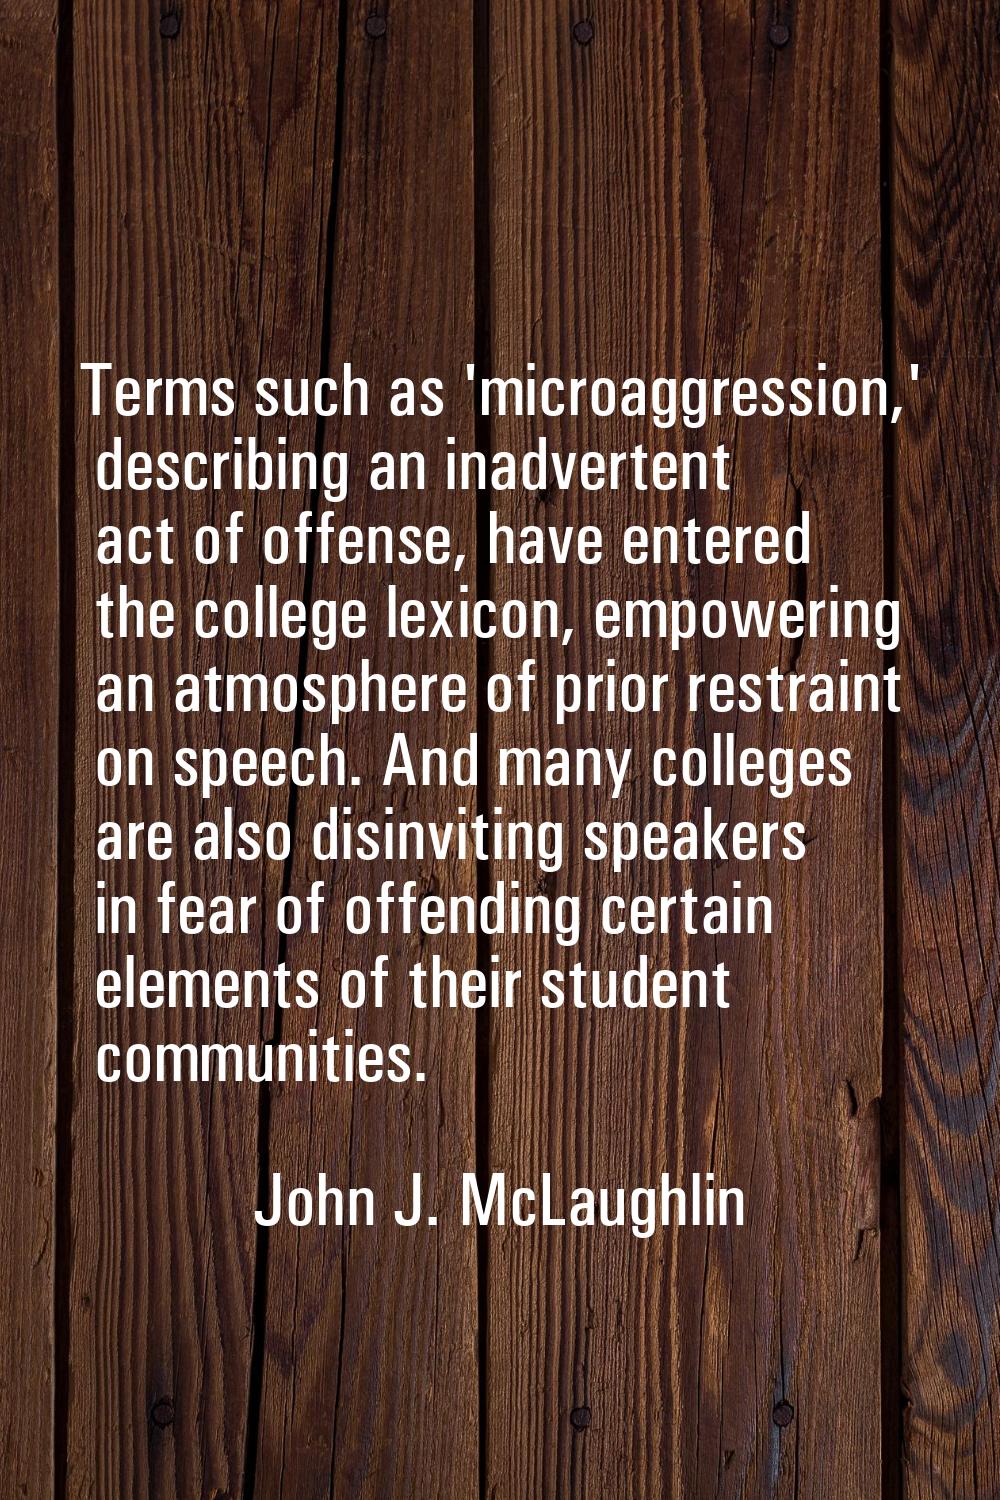 Terms such as 'microaggression,' describing an inadvertent act of offense, have entered the college